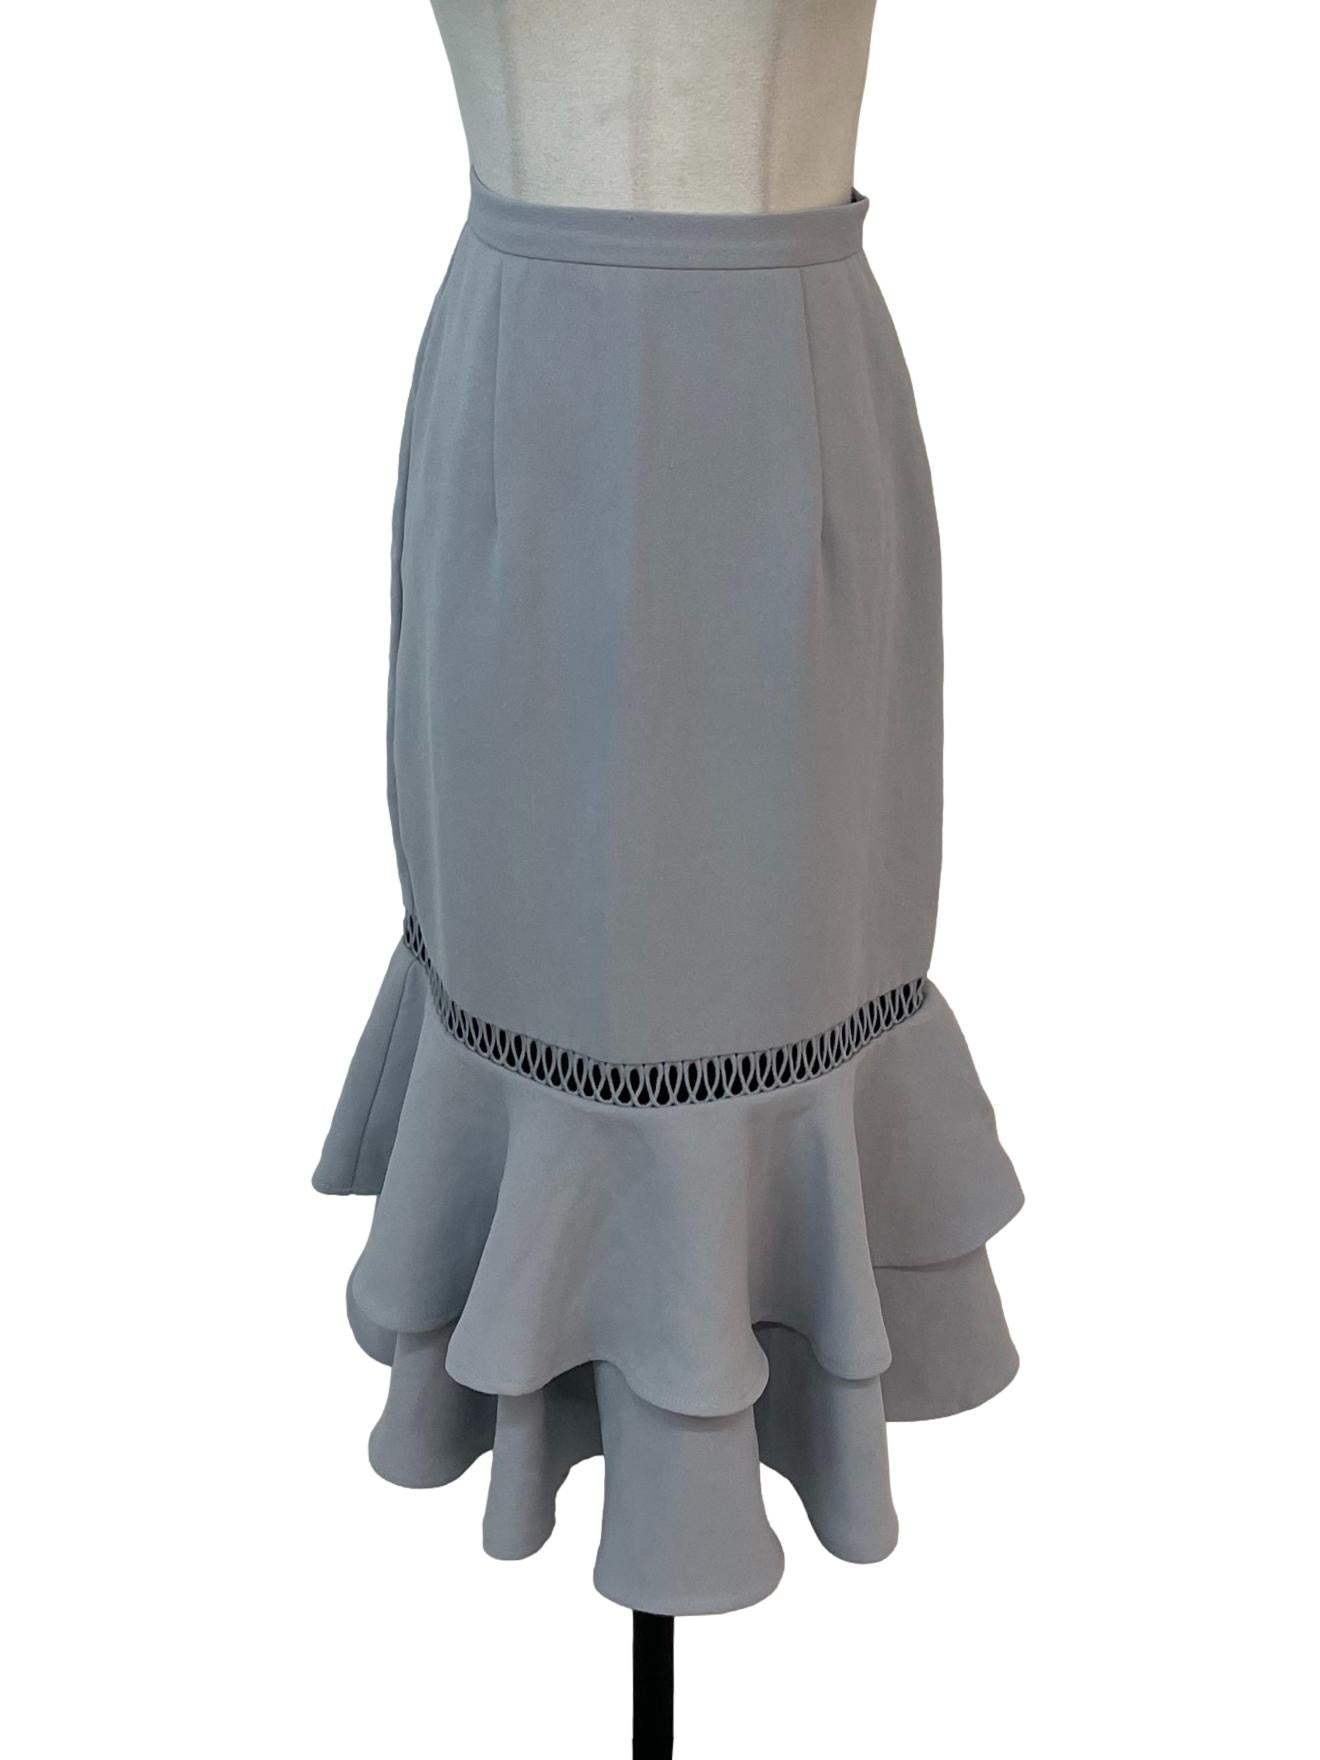 Lavender Grey Pencil Skirt with Cut Out Edges